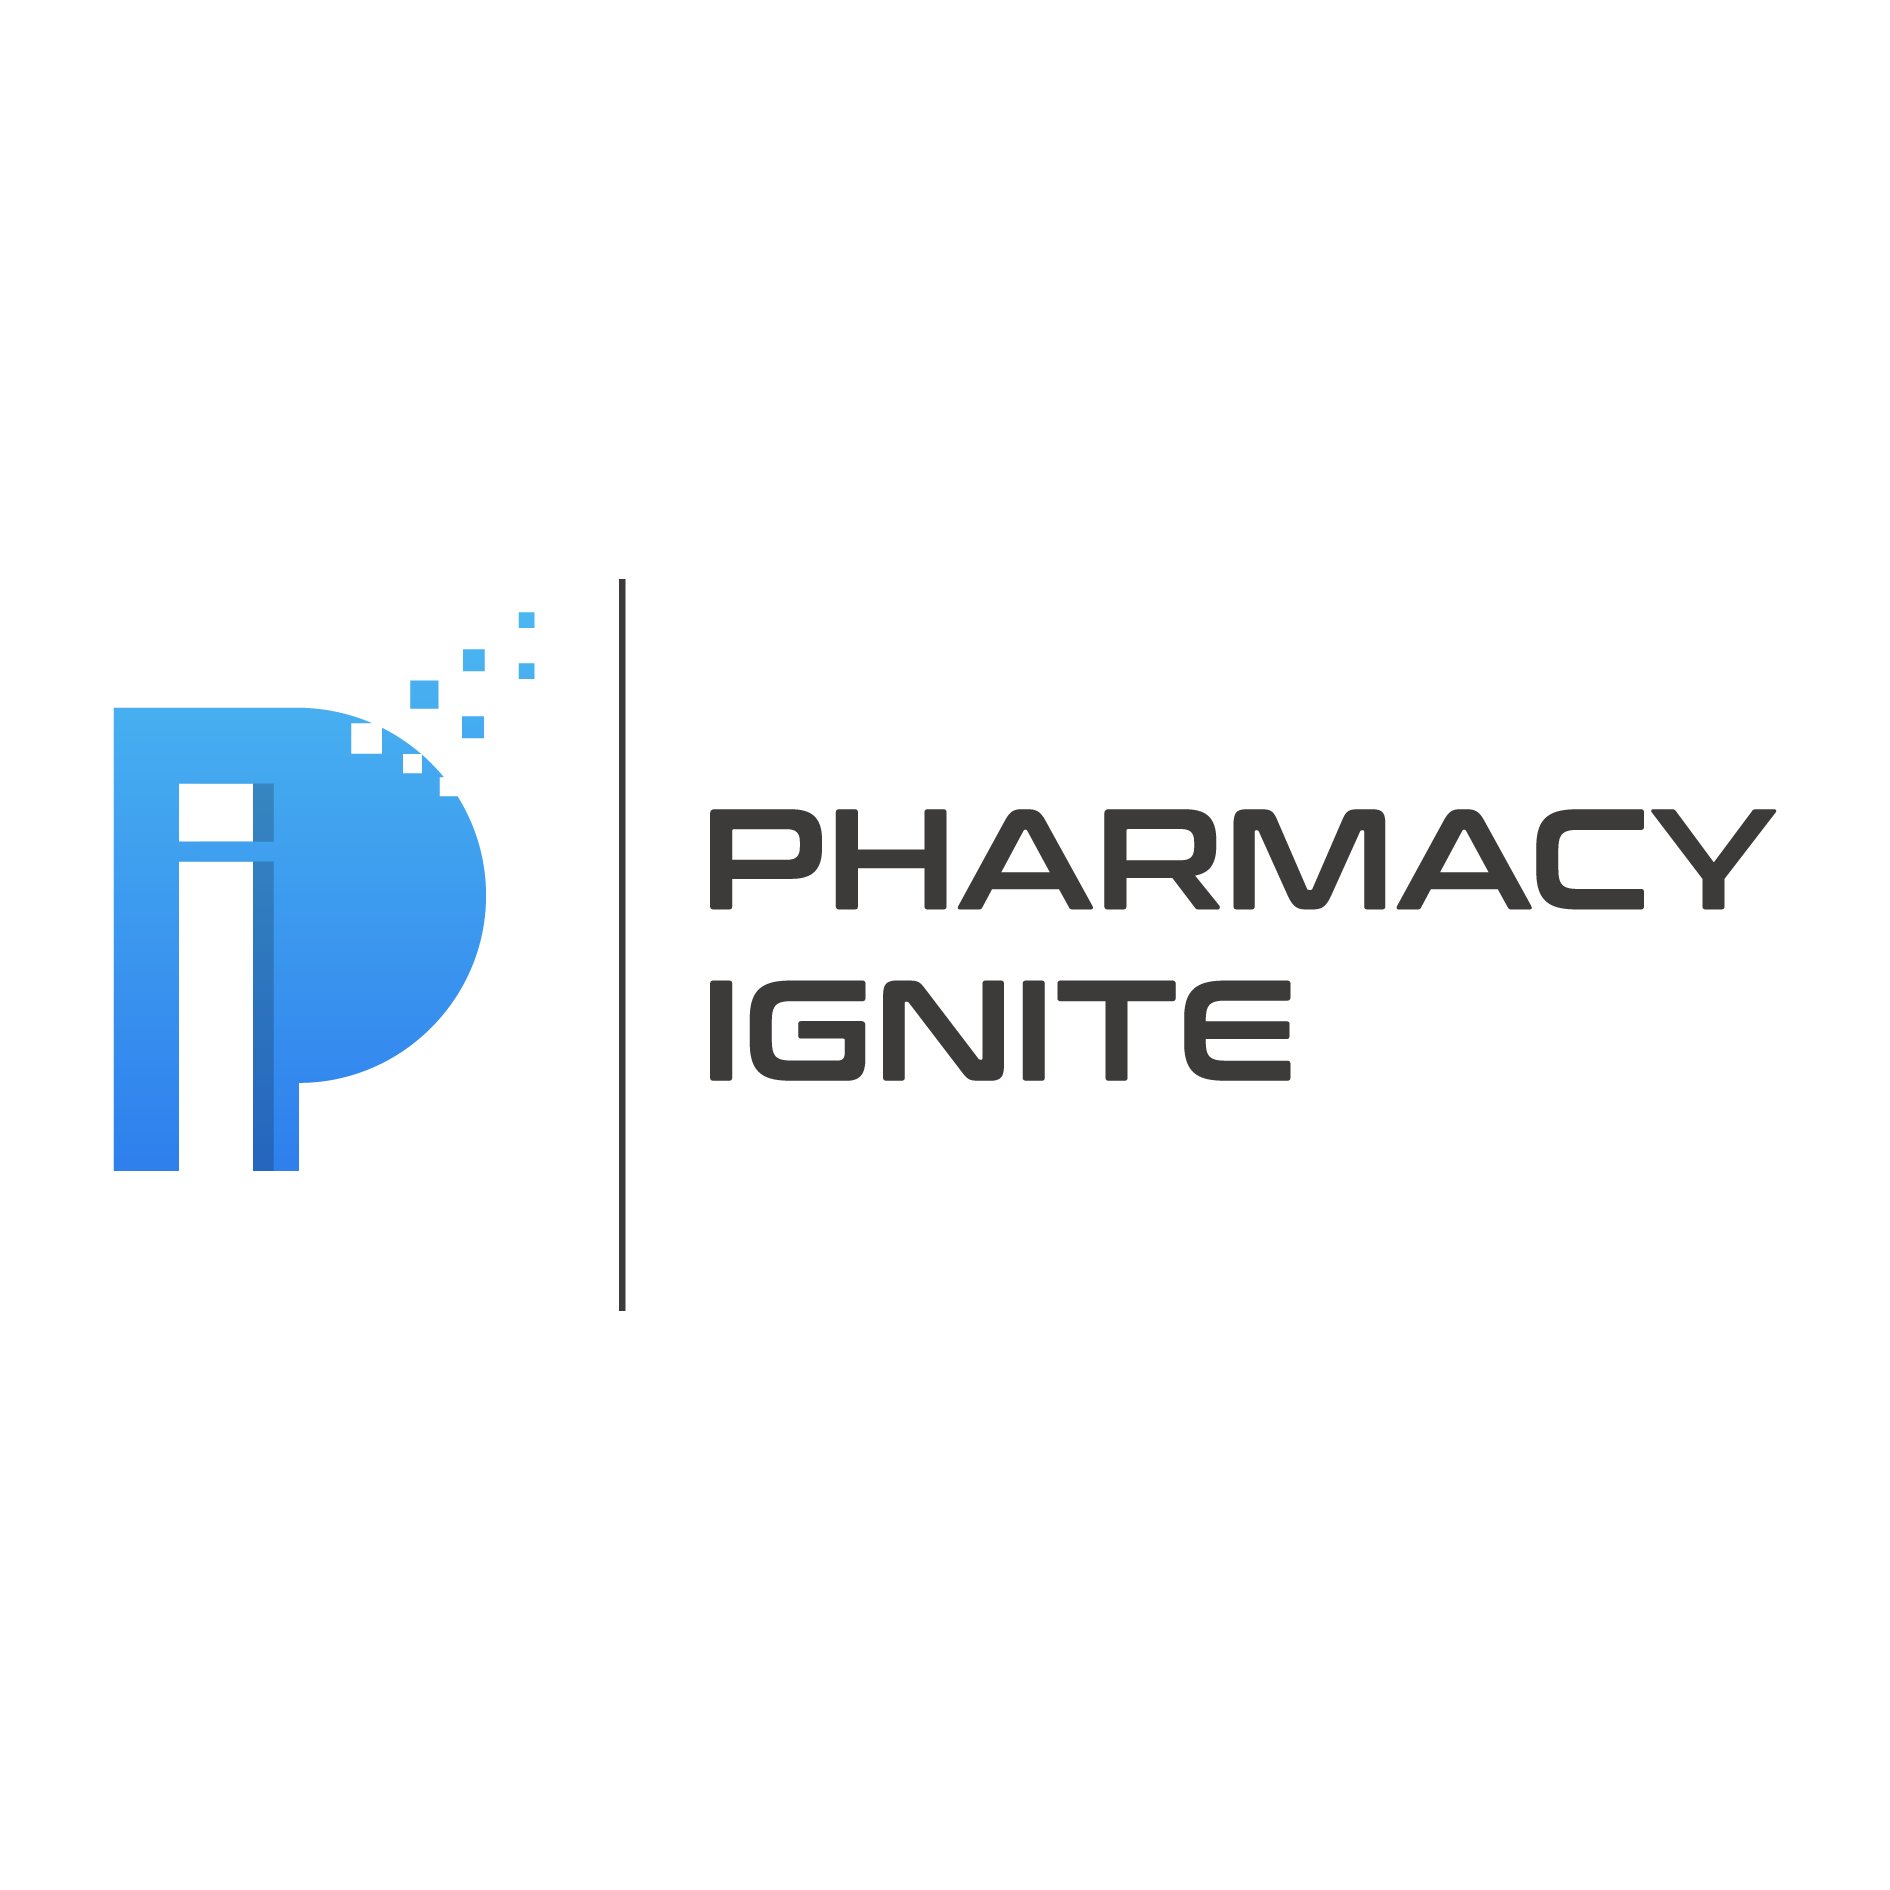 Our mission is to help you grow your independent pharmacy through digital marketing. Ignite your pharmacies growth with Pharmacy Ignite. #pharmacyignite